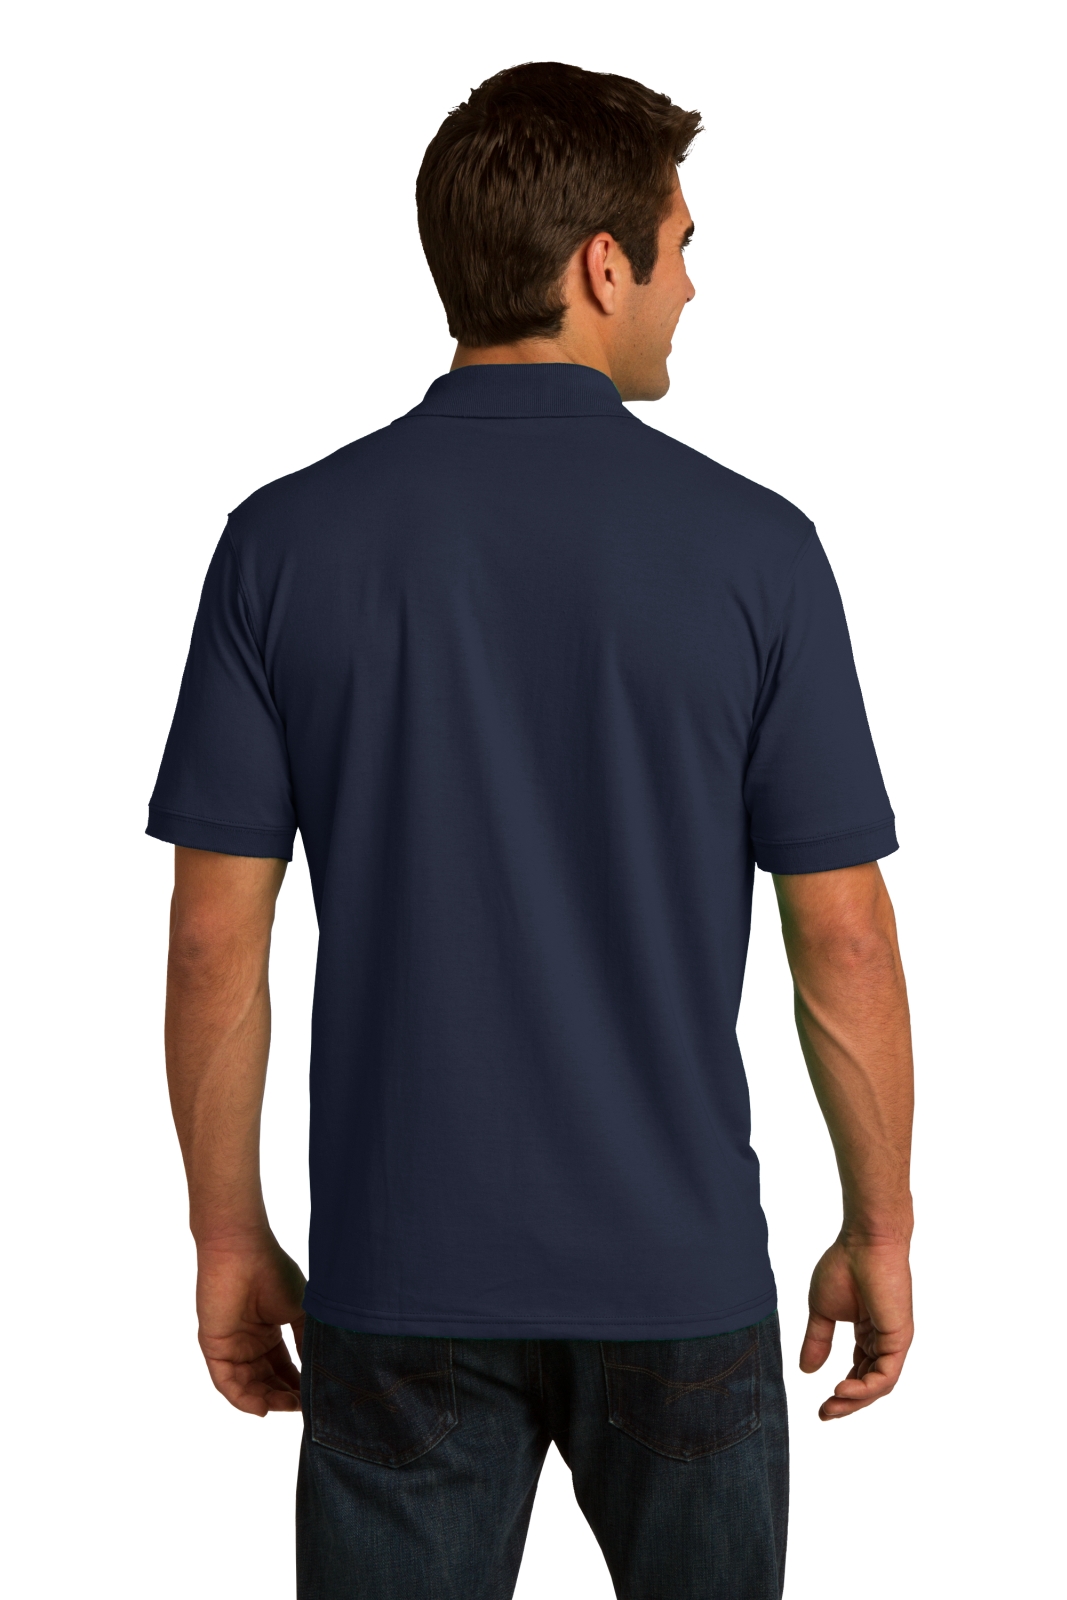 Port & Company Tall Core Blend Jersey Knit Polo - image 3 of 3